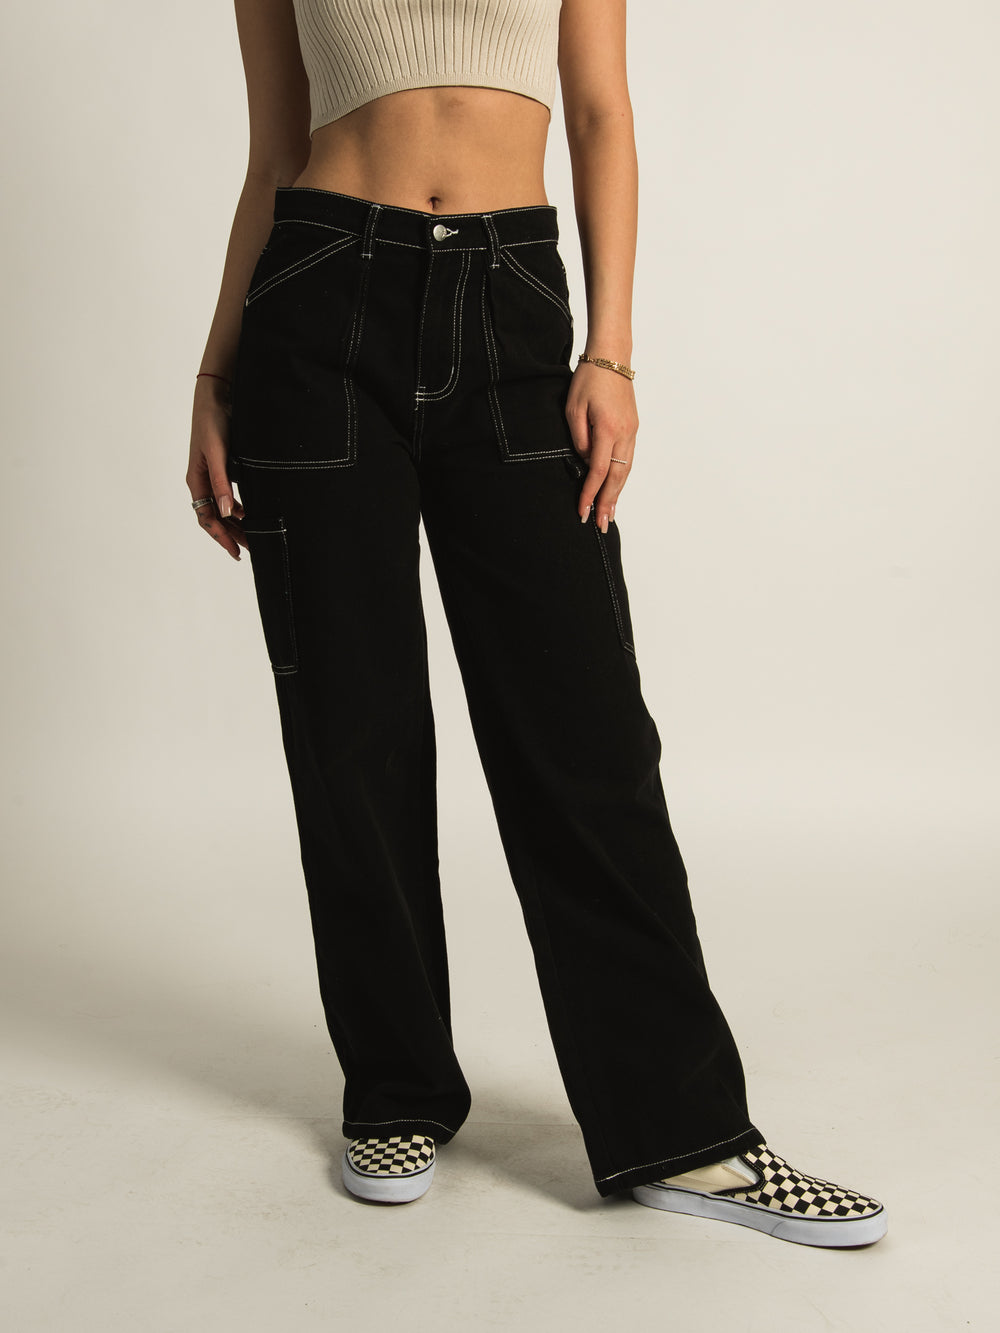 HARLOW WIDE LEG UTILITY PANT  - CLEARANCE